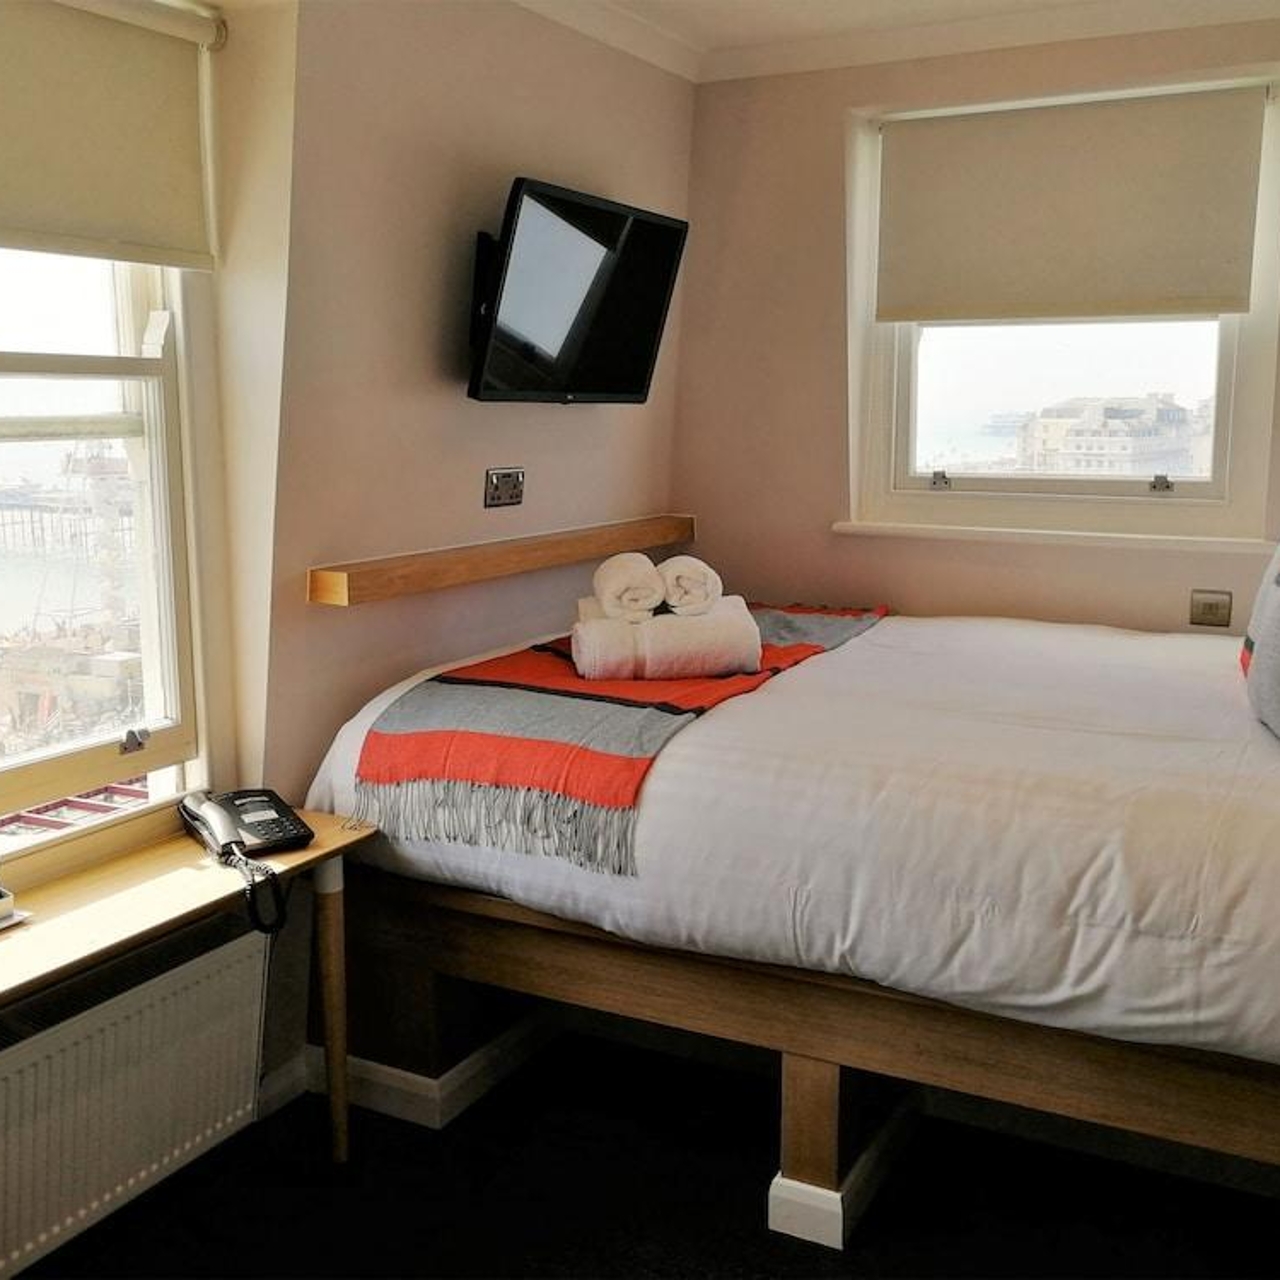 Legends Hotel Brighton - 3 HRS star hotel in Brighton and Hove (England)